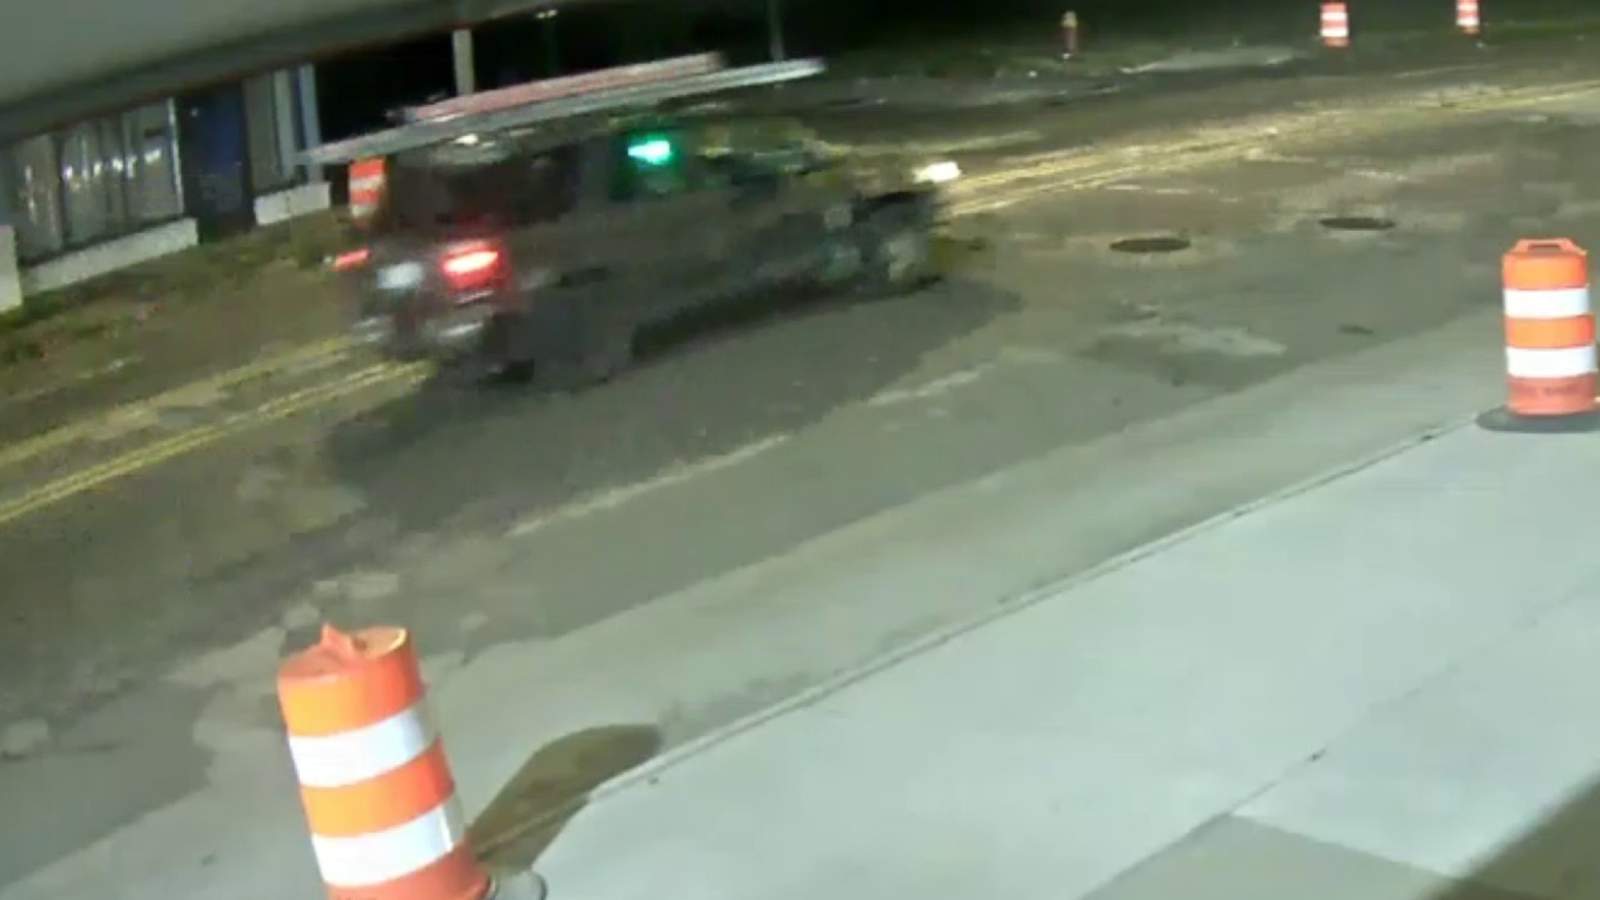 Detroit police need help in identifying driver in fatal hit-and-run on citys west side